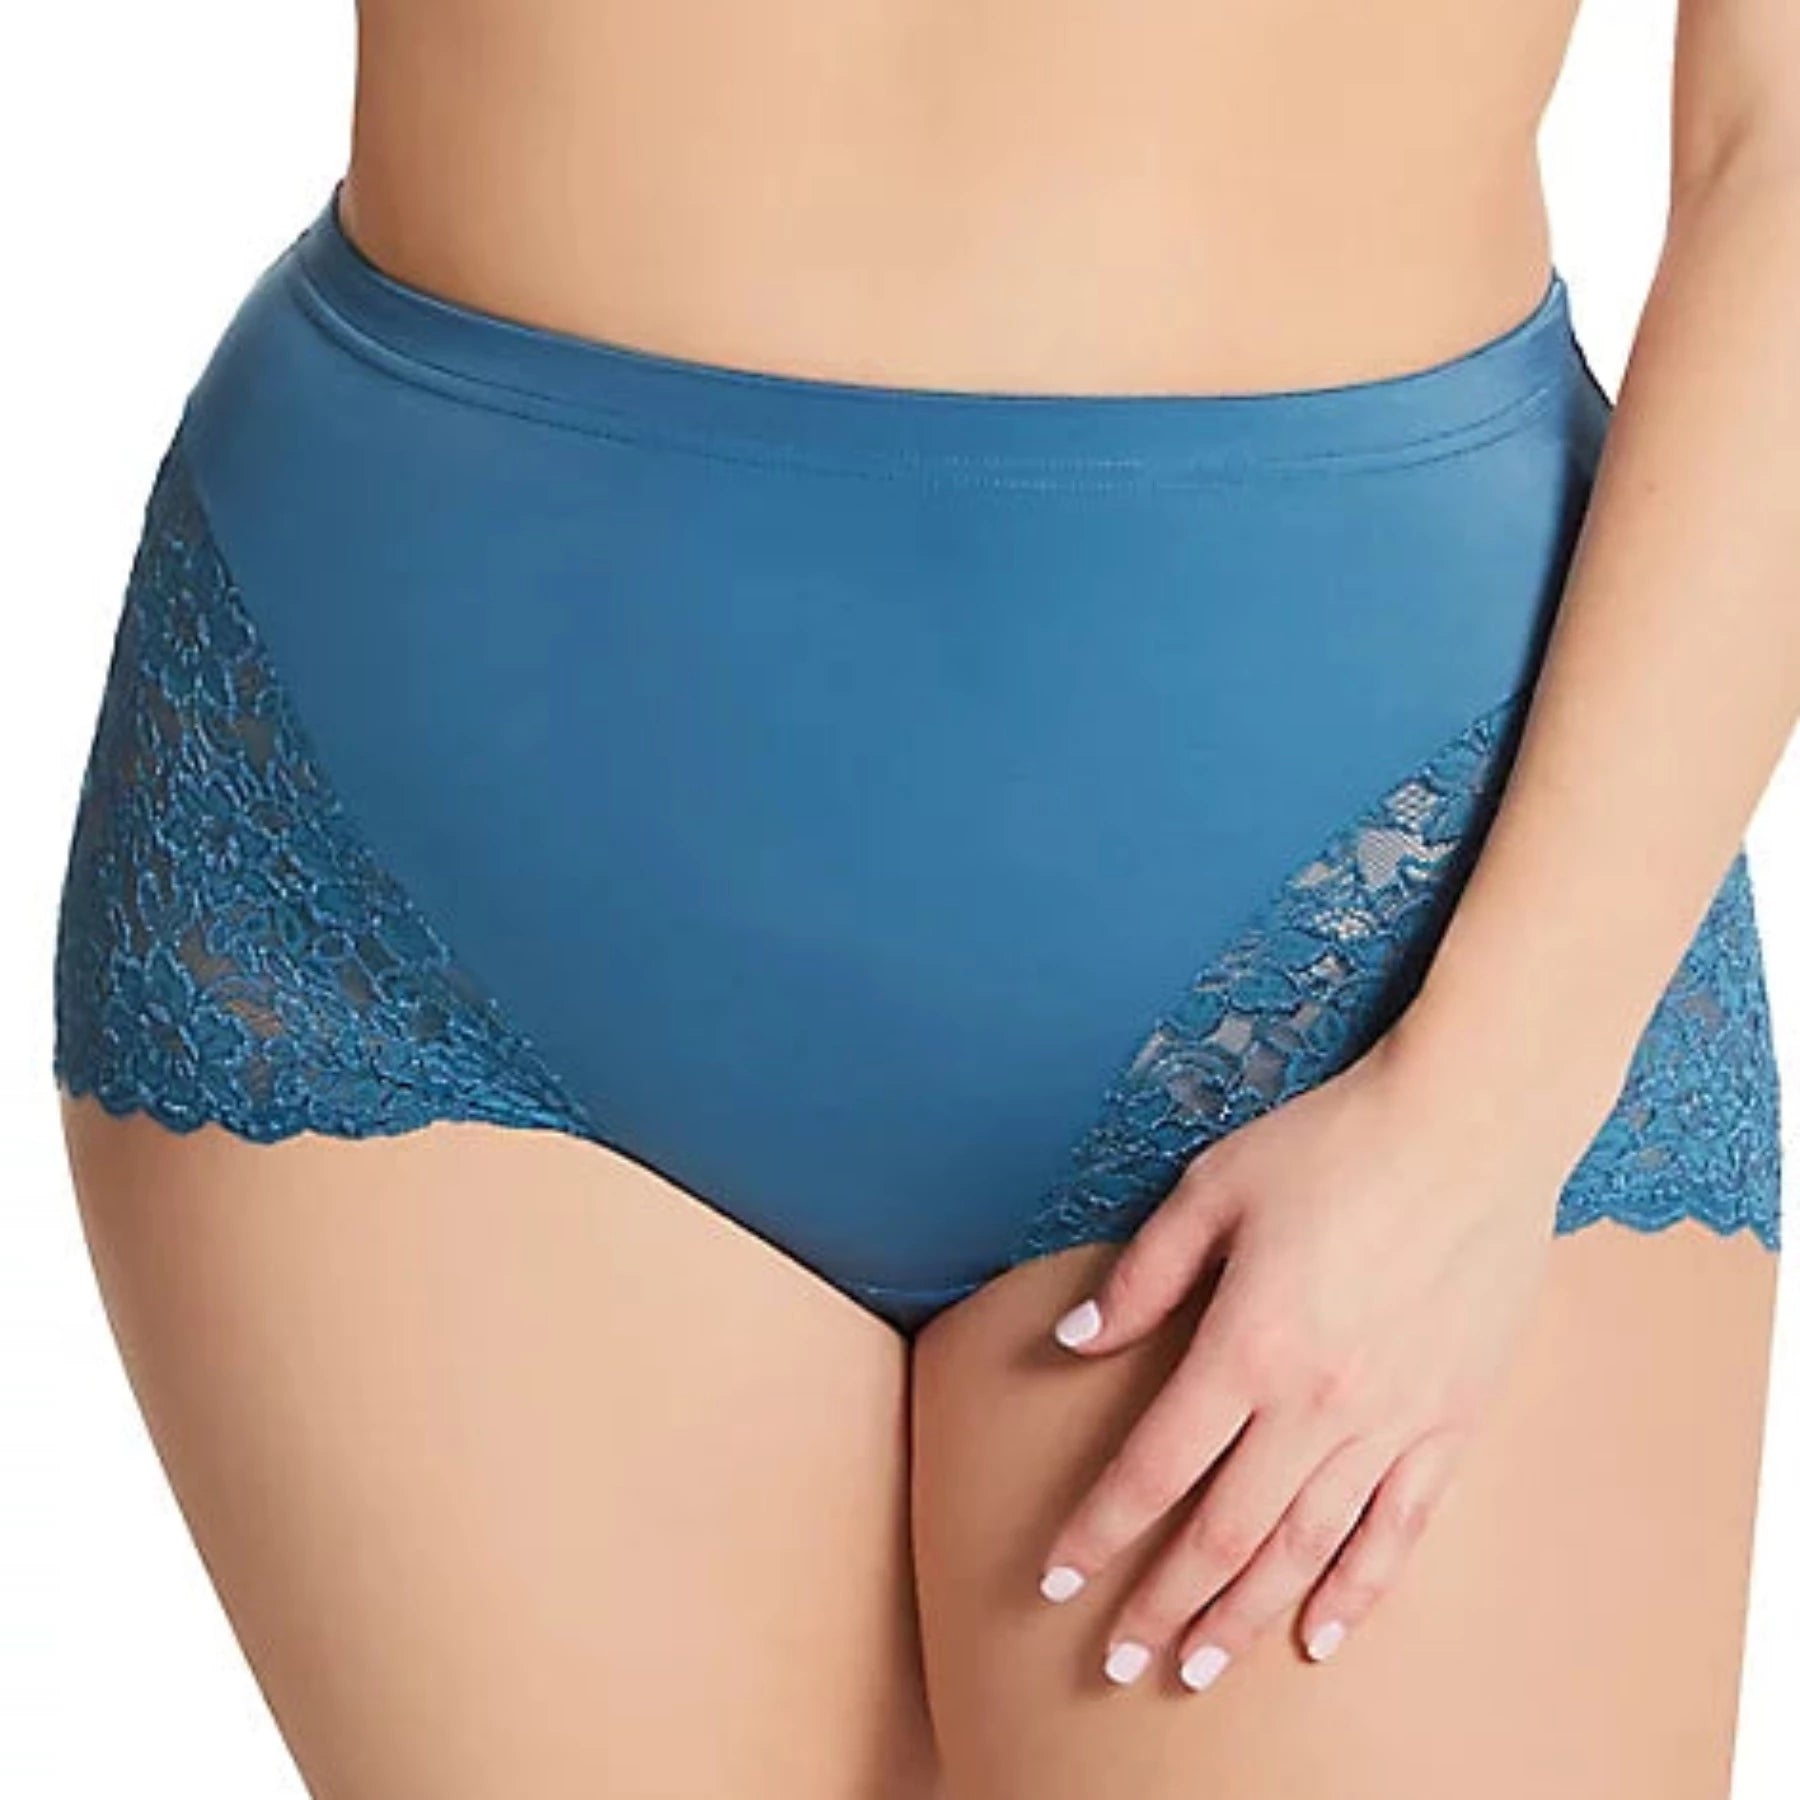 Cheeky Stretch Lace Panty 3311 - Teal